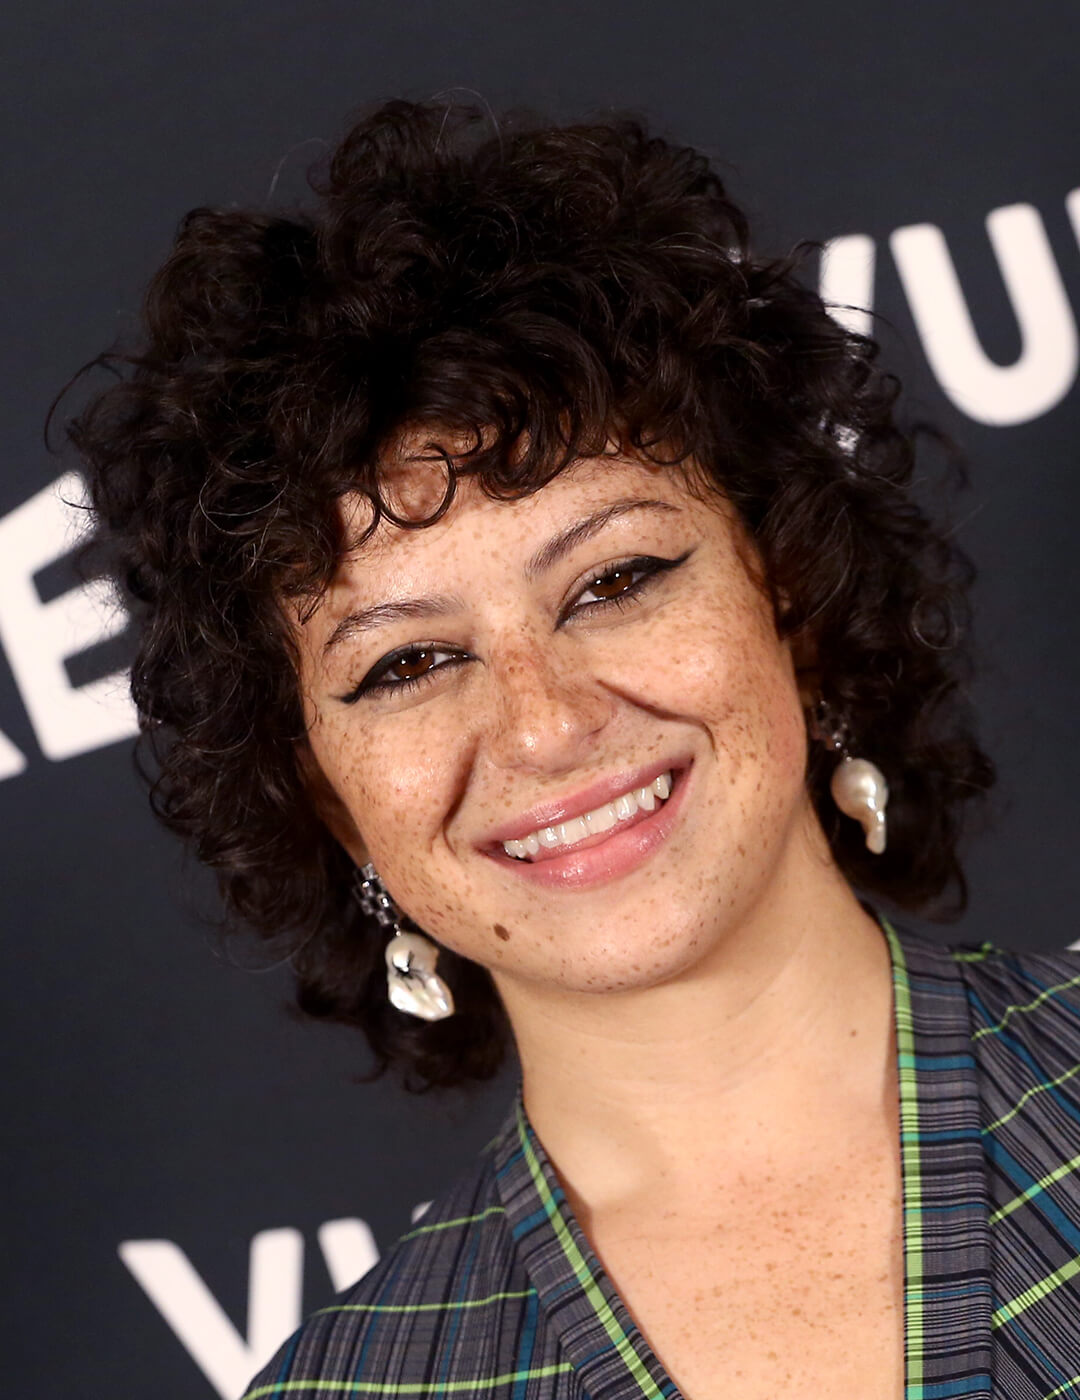 Smiling Alia Shawkat rocking a short curly hairstyle with wispy bangs